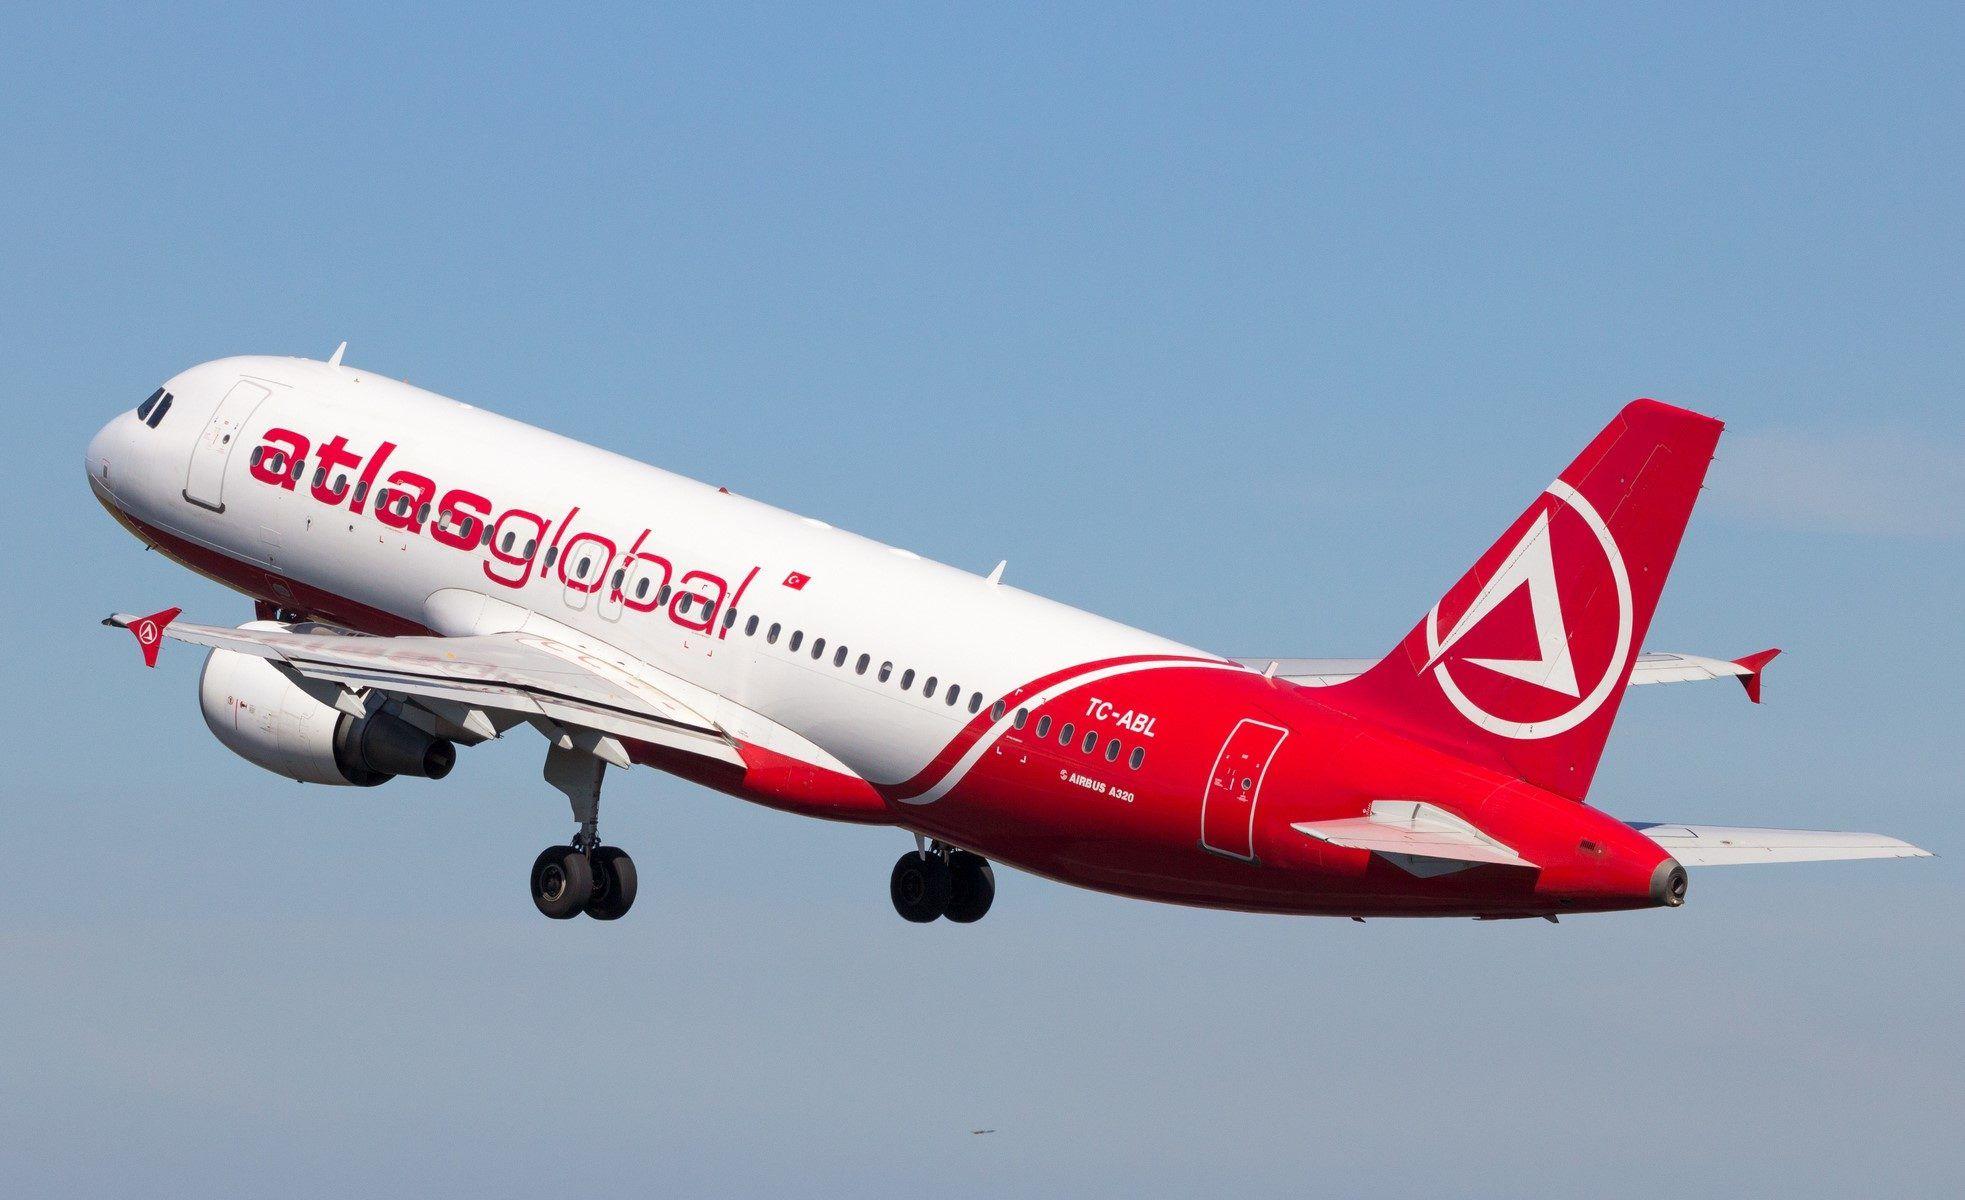 Airline Swan Logo - Airline Insight: AtlasGlobal – Blue Swan Daily